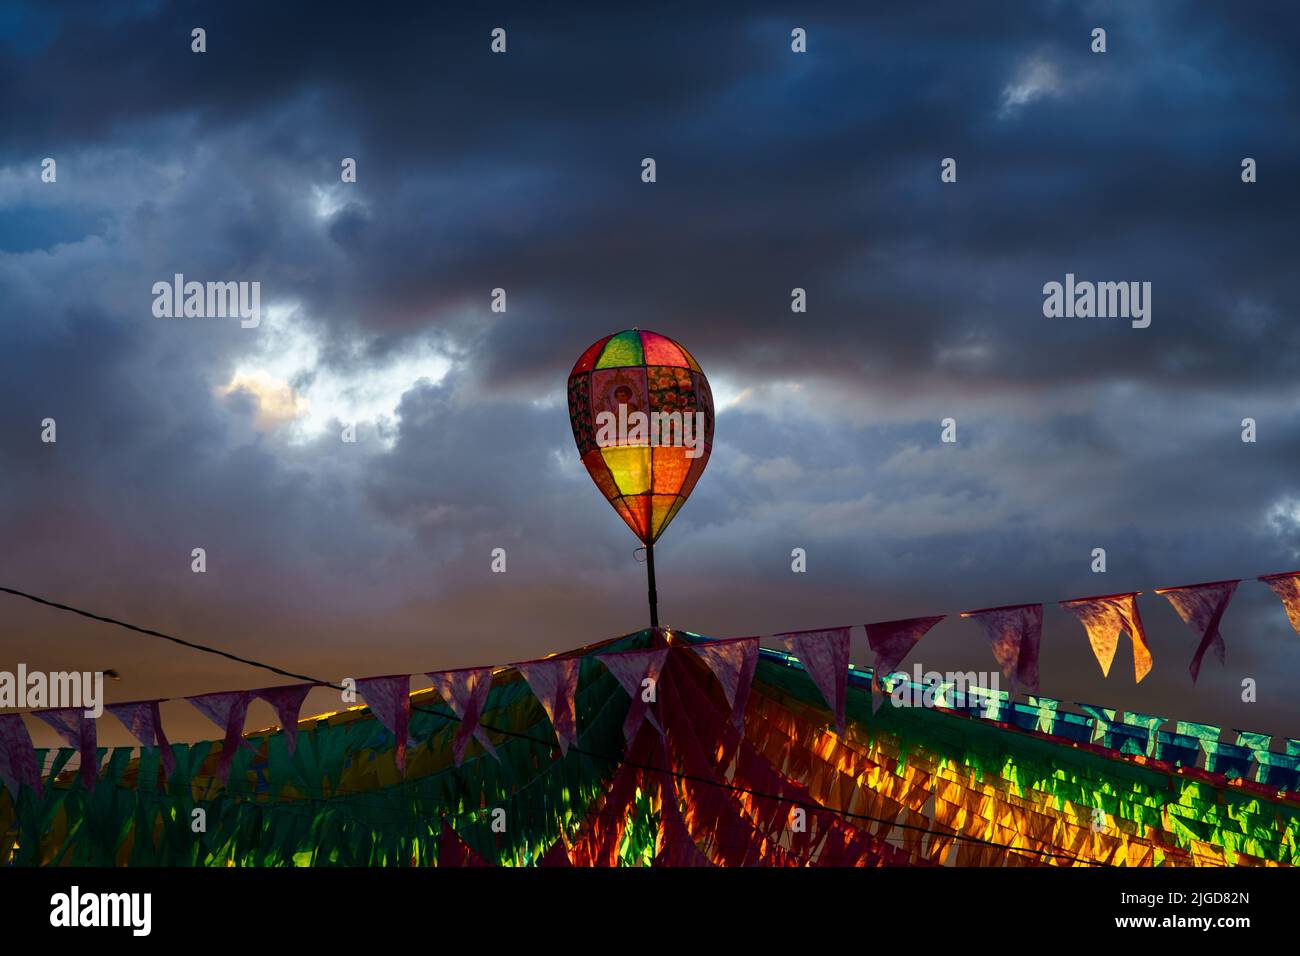 colorful flags and decorative balloon of festa junina in brazil Stock Photo